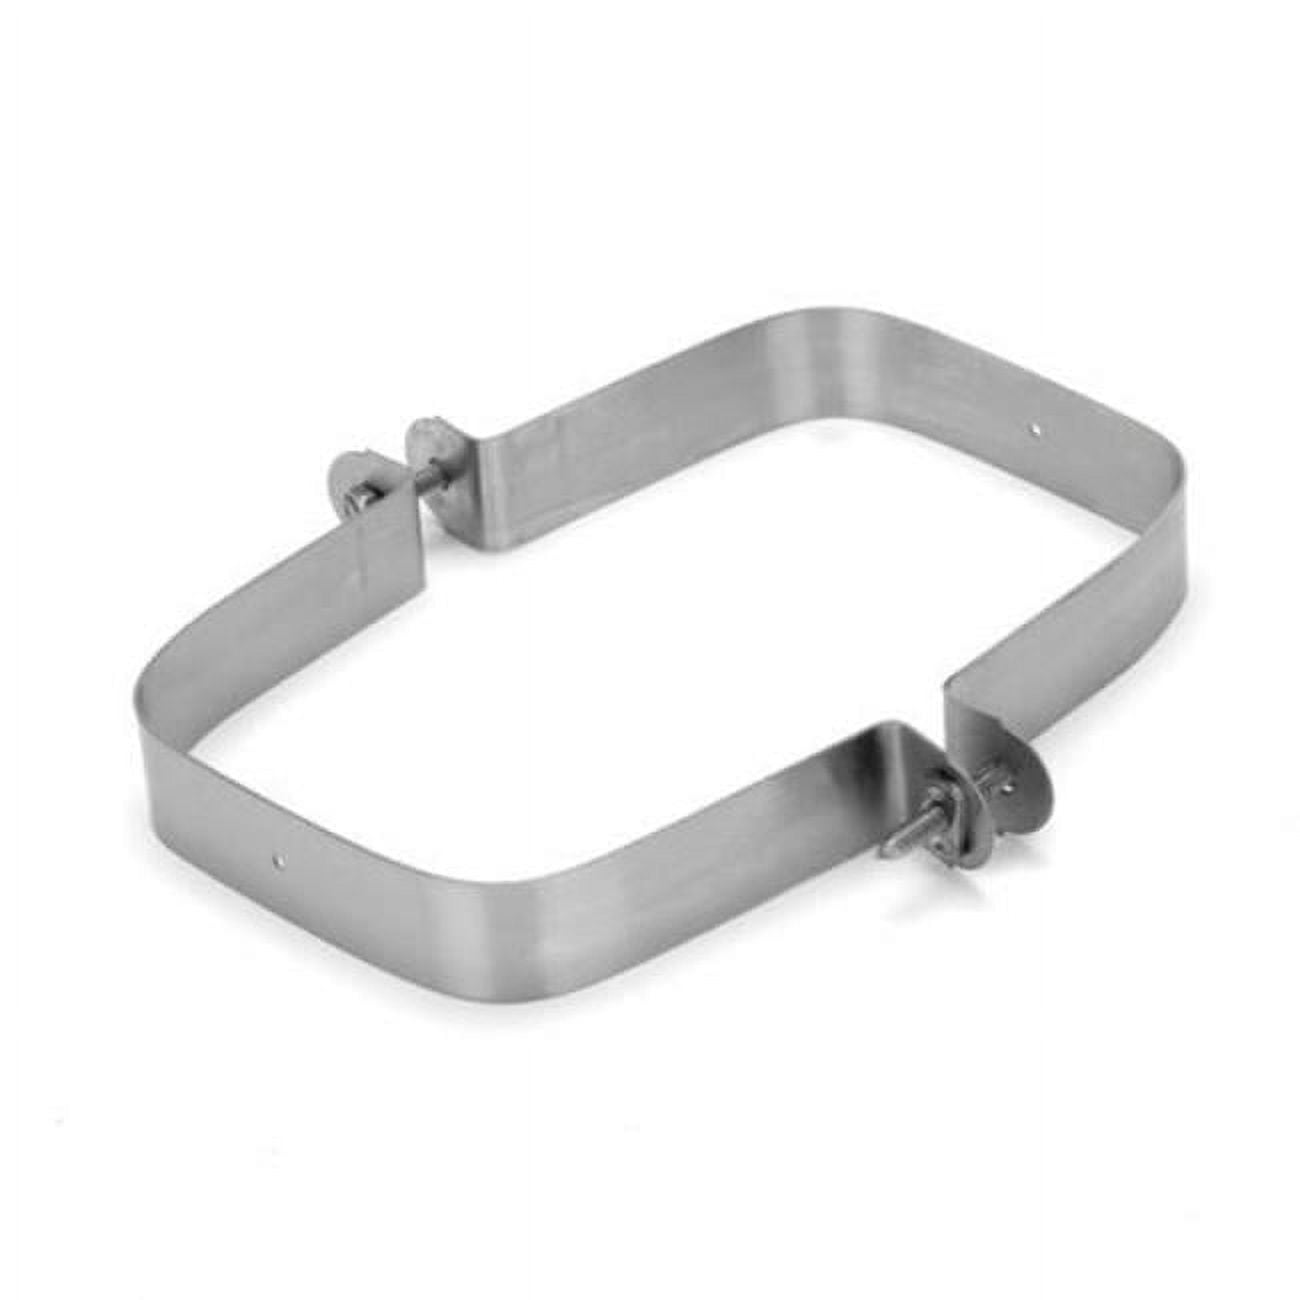 Picture of Home Saver 21463 18 gauge RectangleFlex Top Clamp